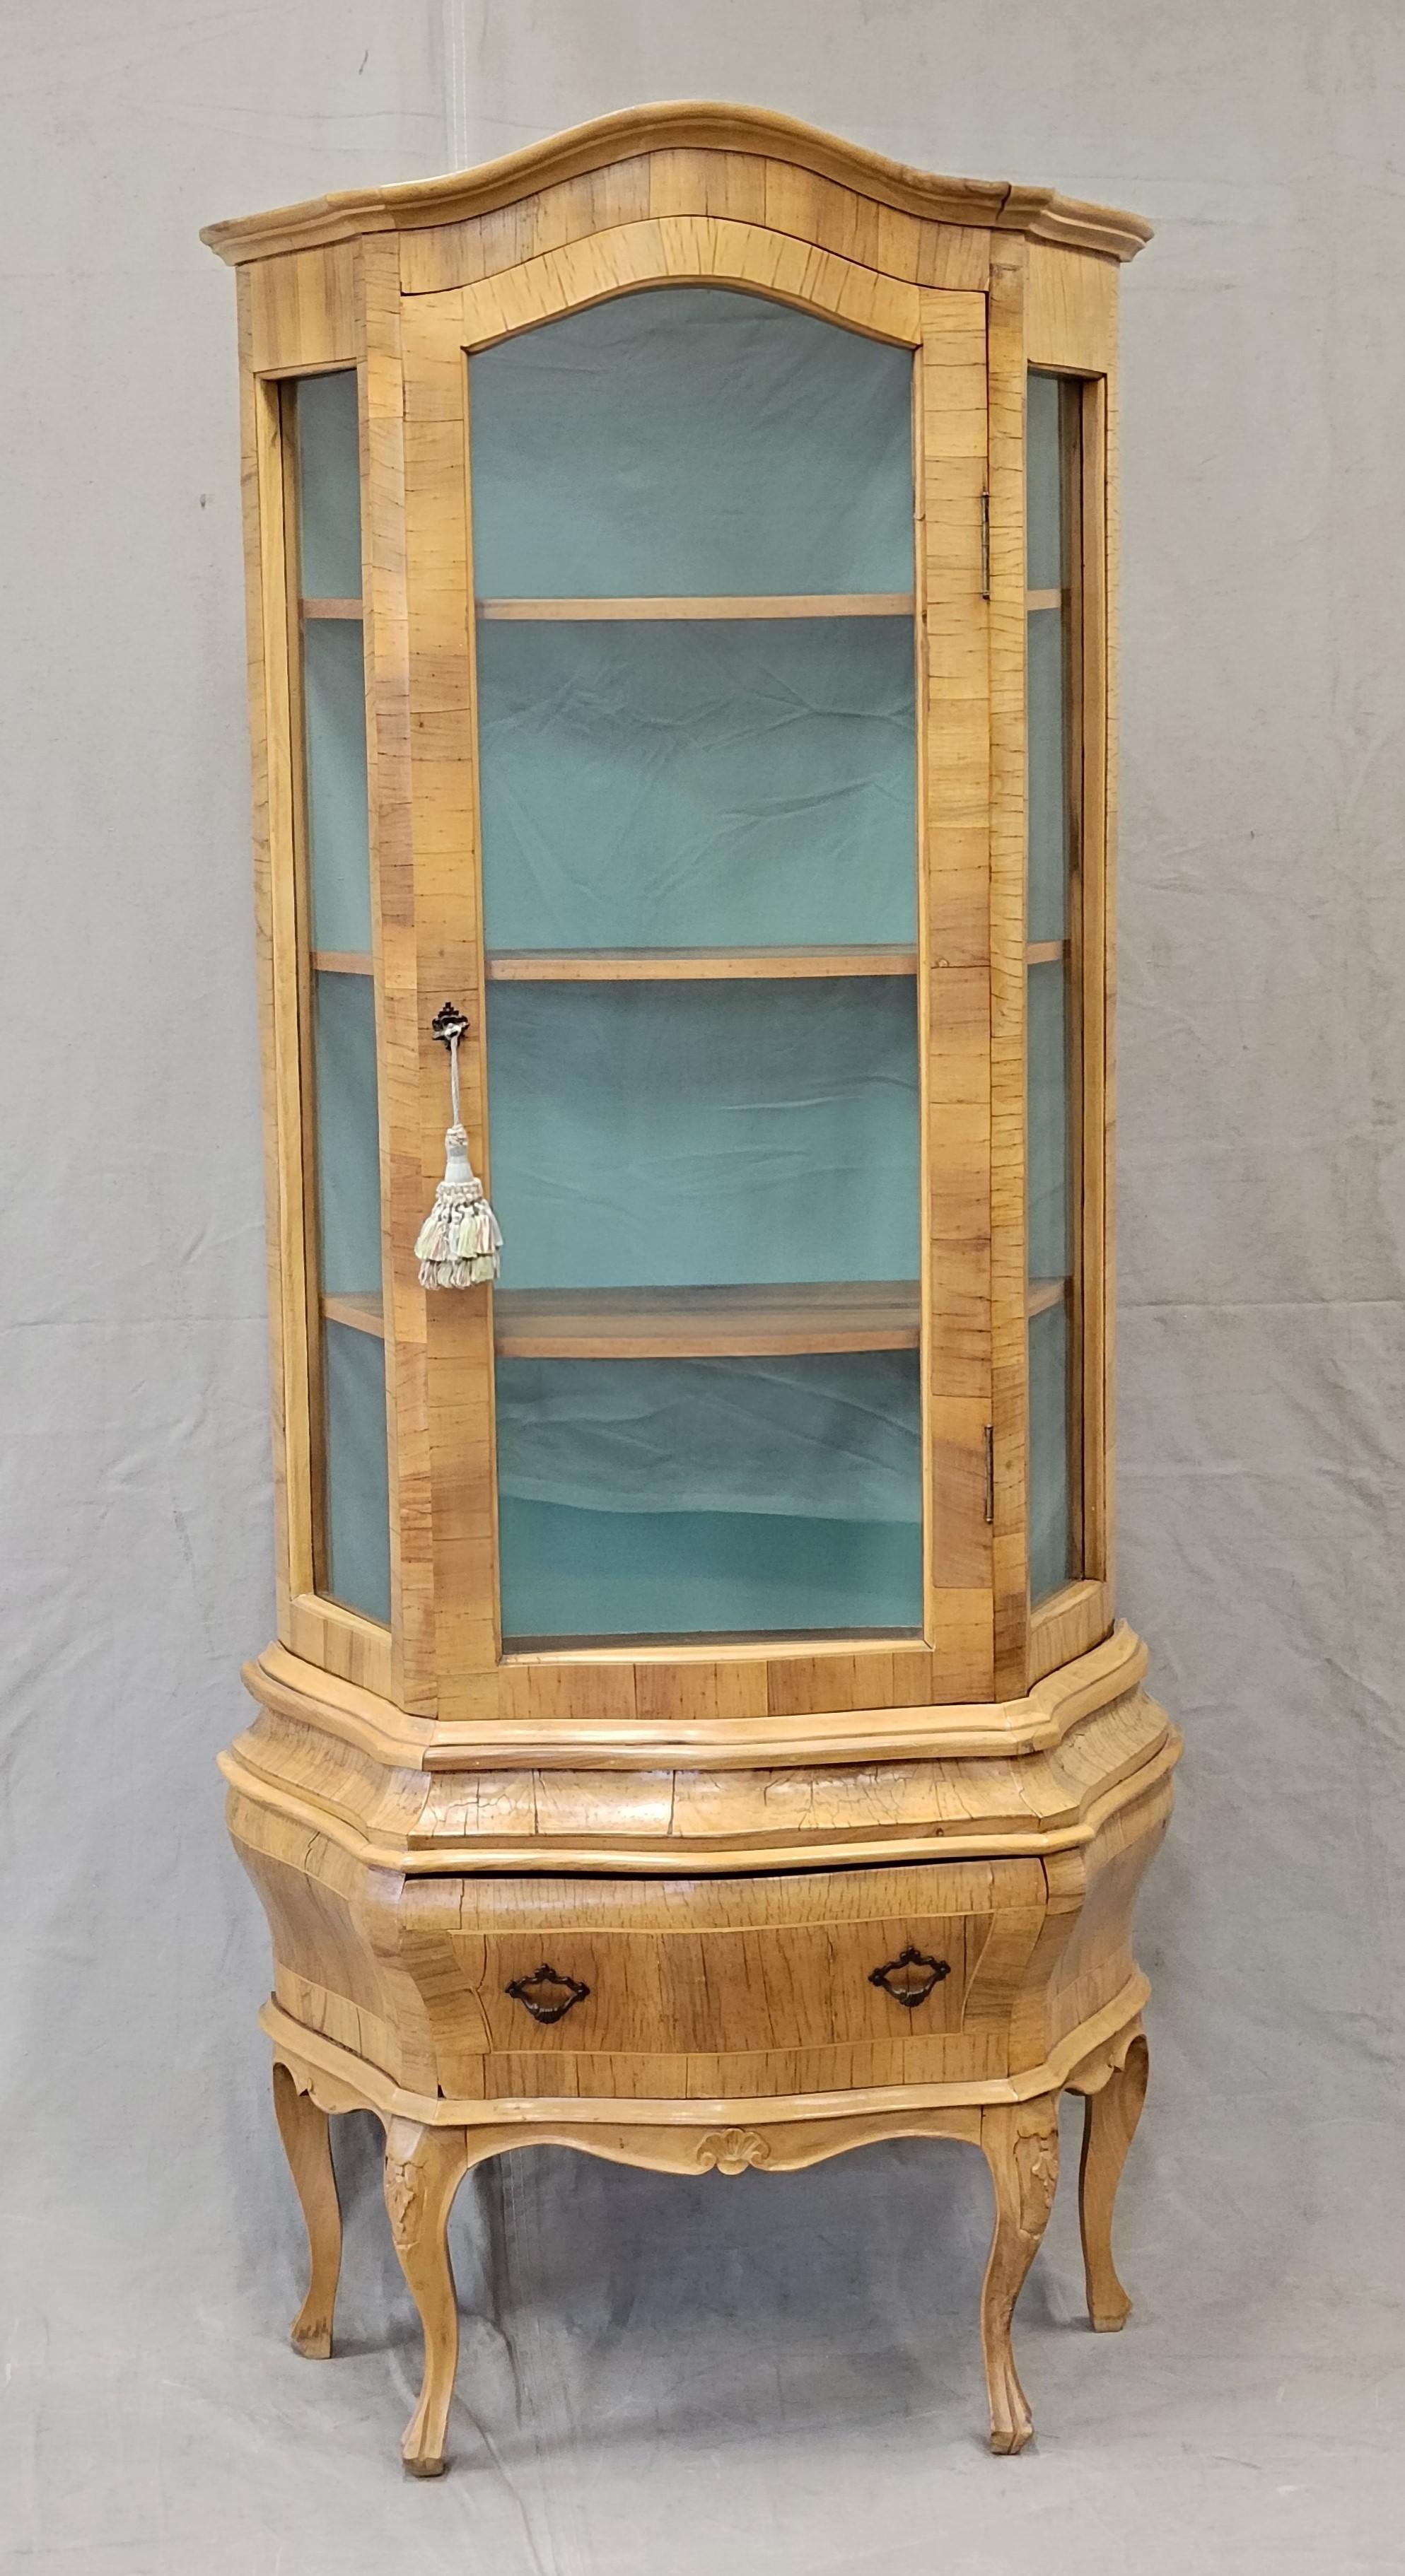 Beautiful French provincial display cabinet, perhaps from the 1960s. Light honey colored wood, perhaps ash, glows and background verdigris panel is a lovely contrast. Three removable wood shelves. Door closes and locks but due to time and shrinkage